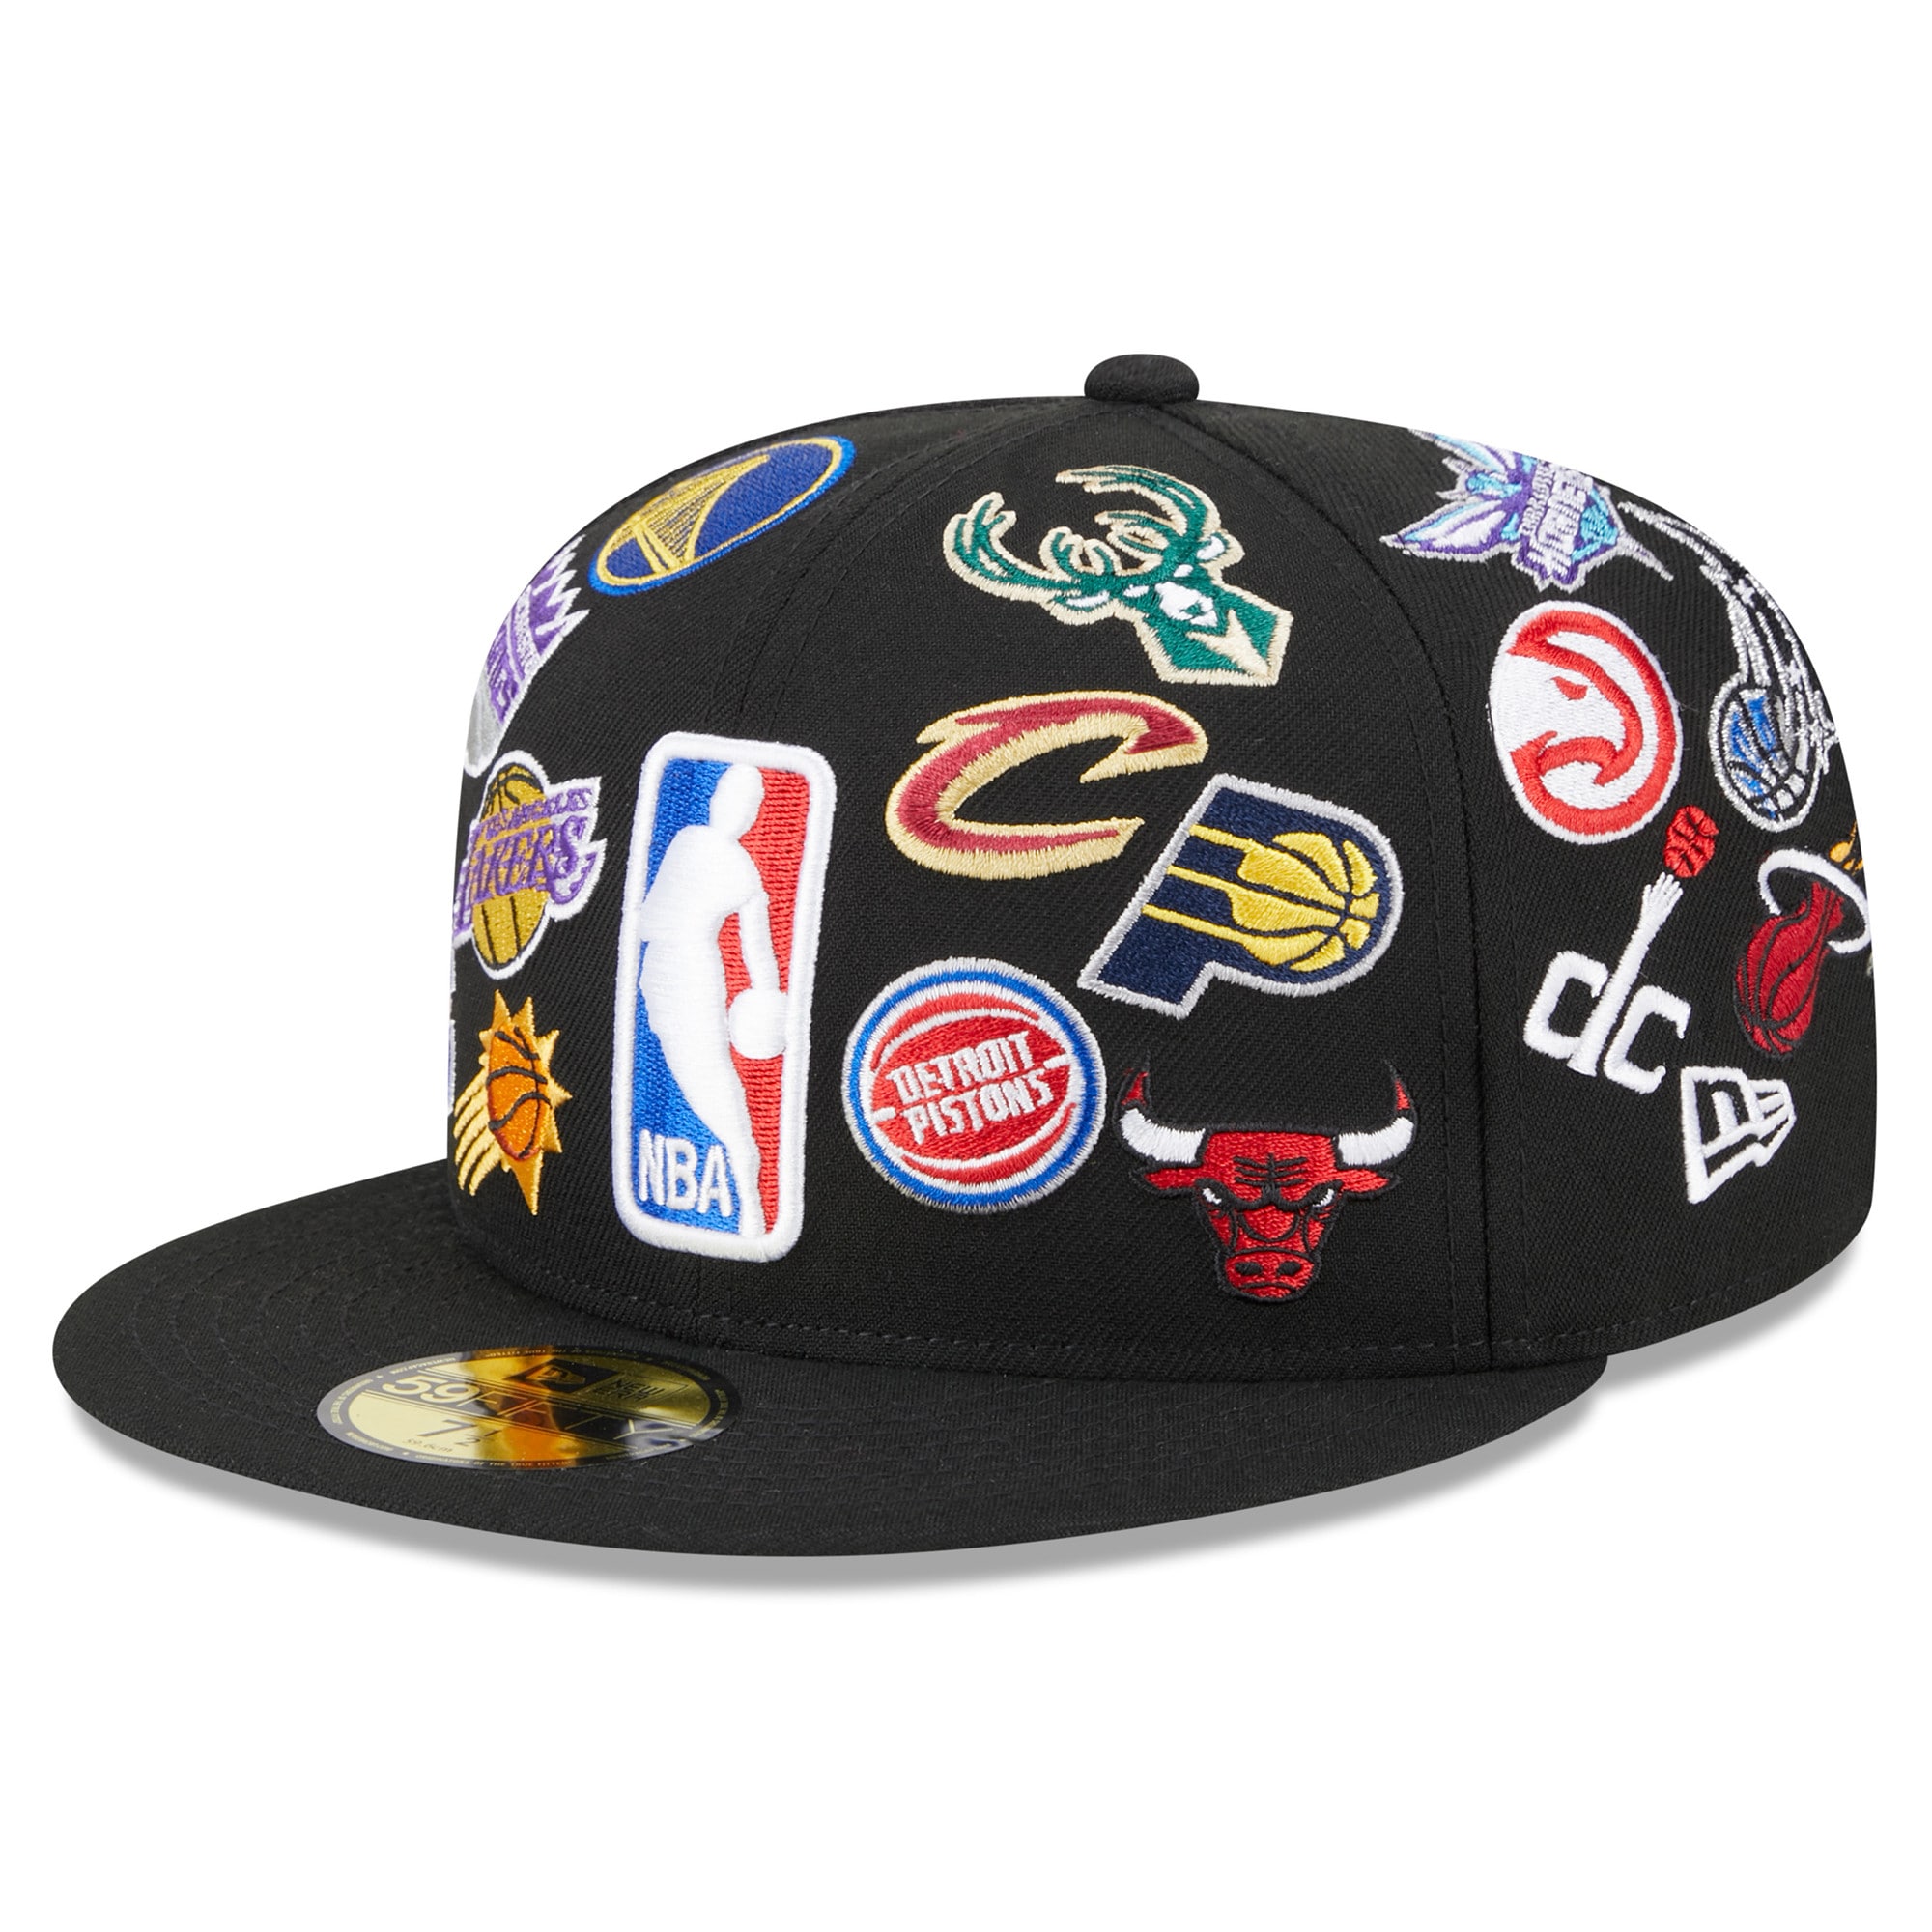 Denver nuggets hats: Elevate Your Game-Day Look缩略图